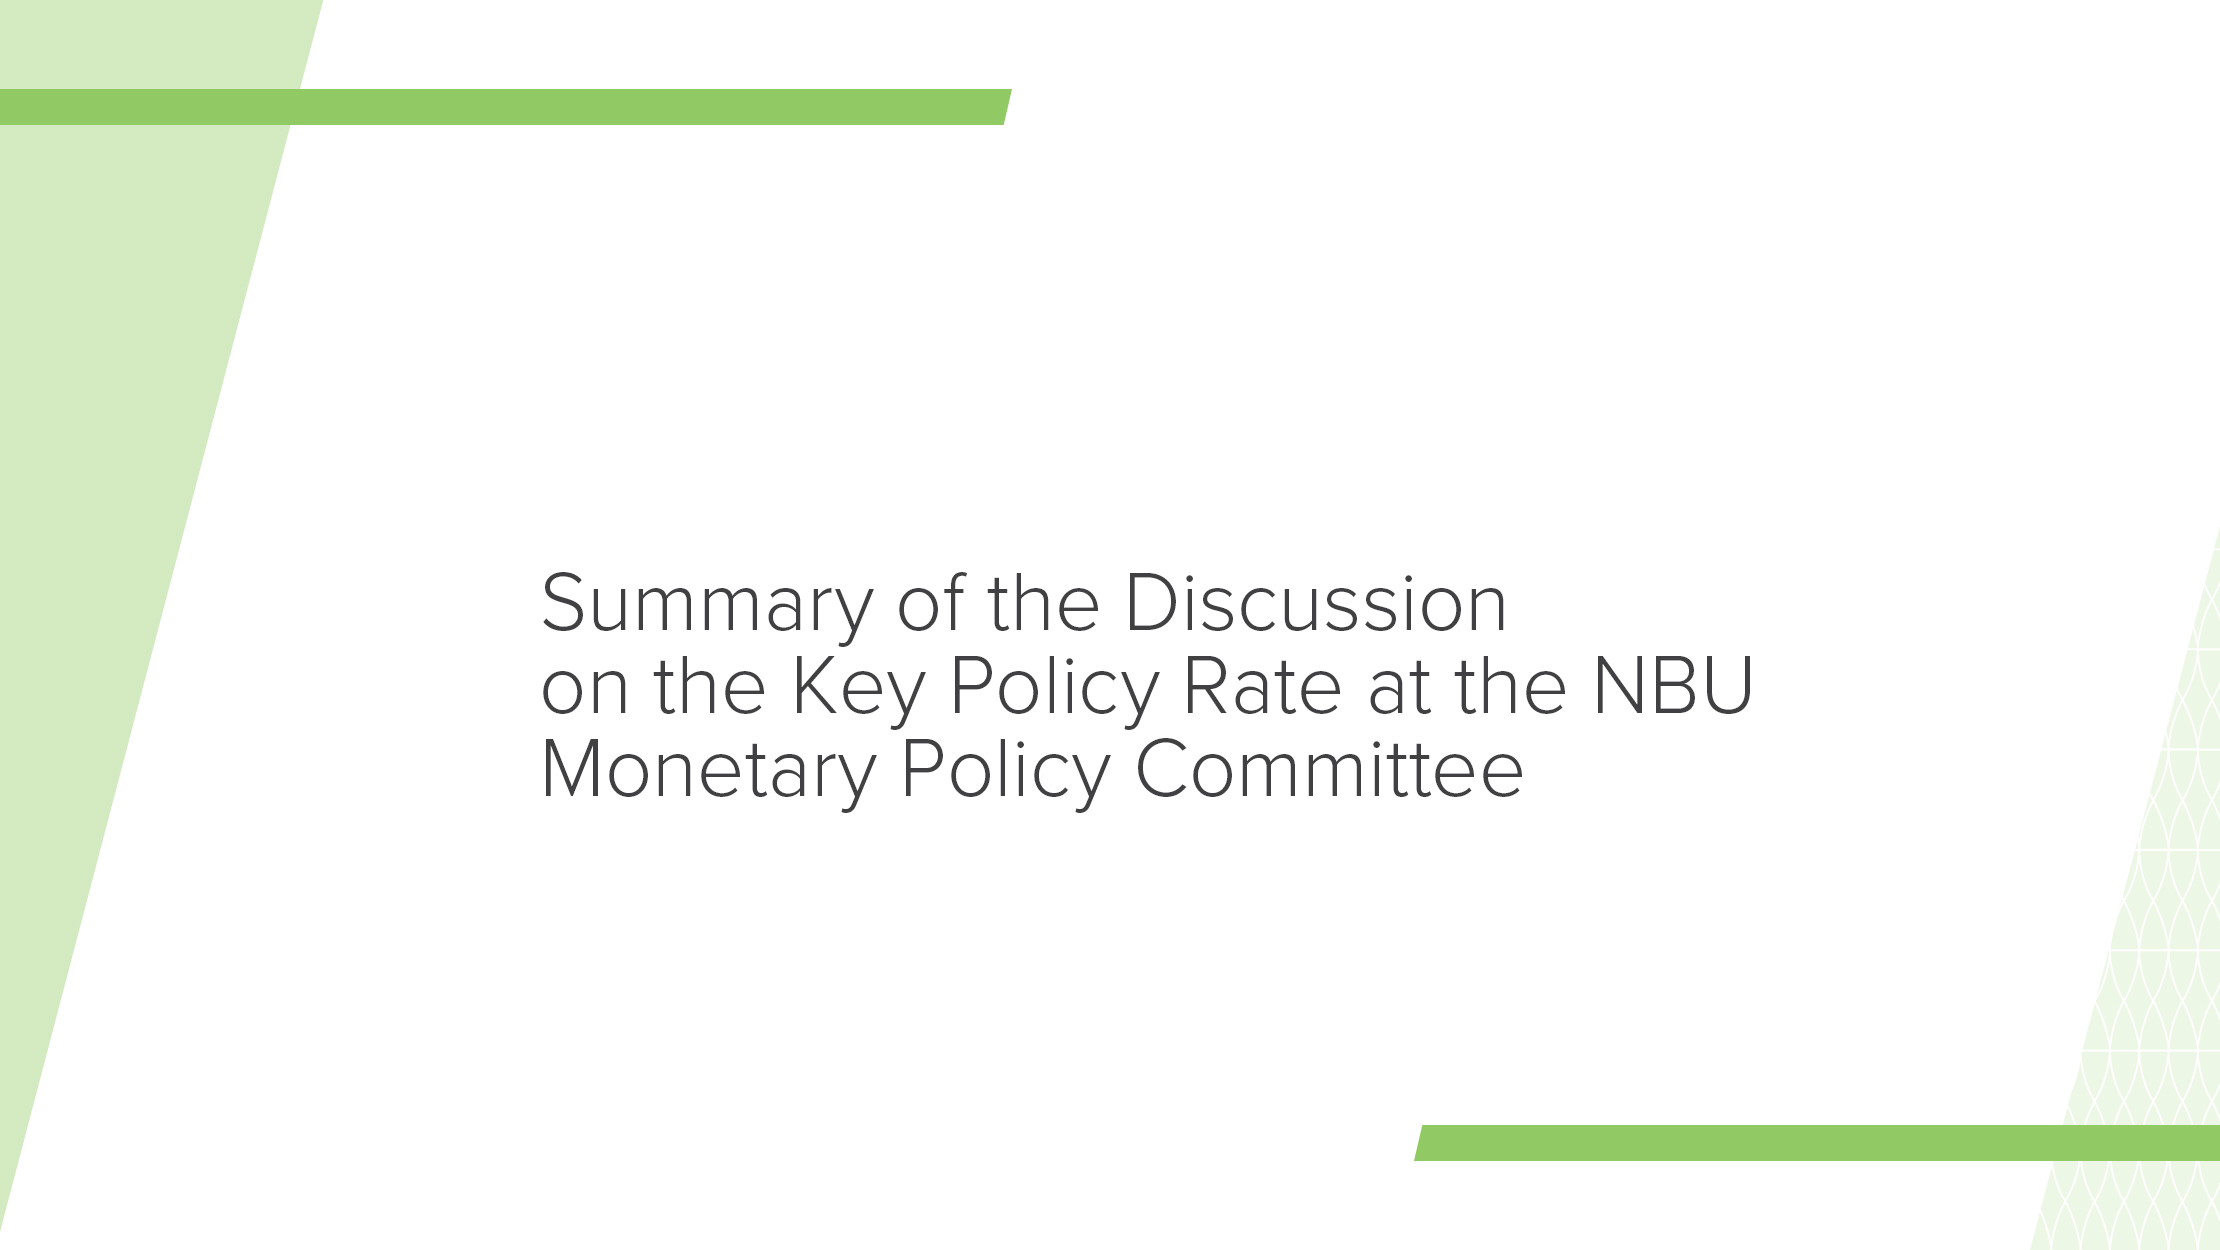 Summary of the Key Policy Rate Discussion by the NBU Monetary Policy Committee 11 March 2020